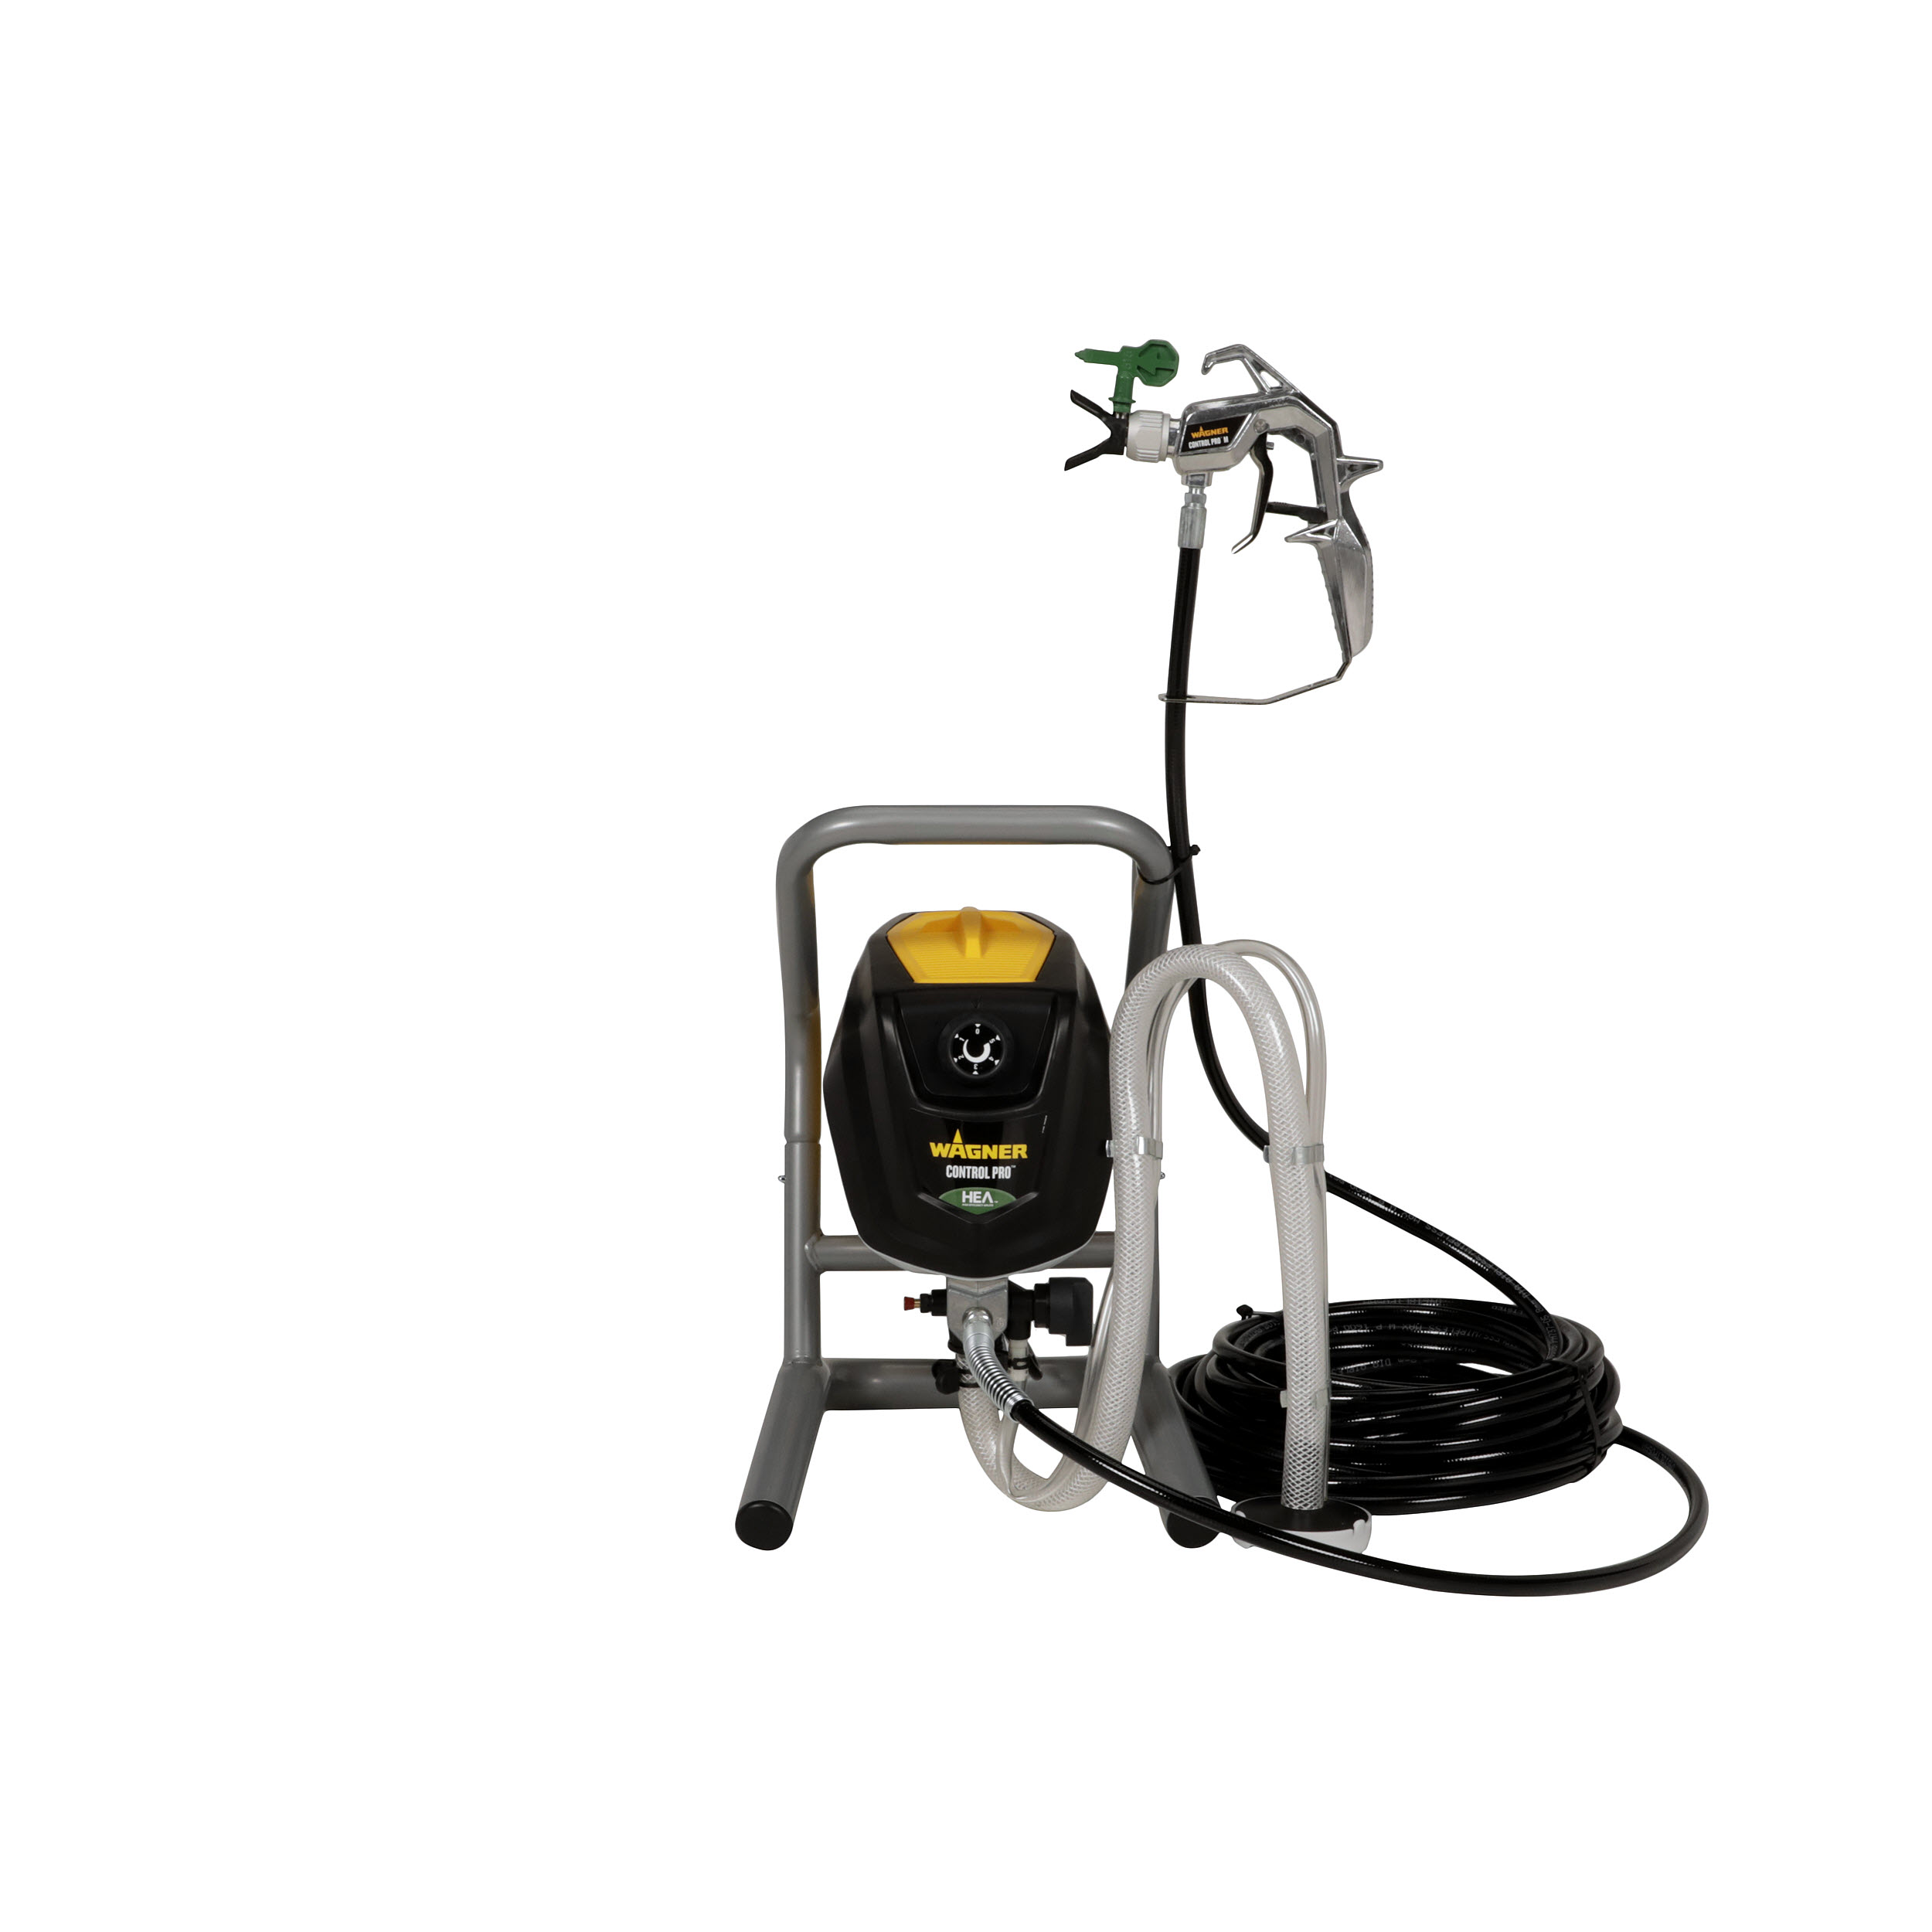 Shop Wagner Wagner Control Pro 190 Paint Sprayer and Attachments at